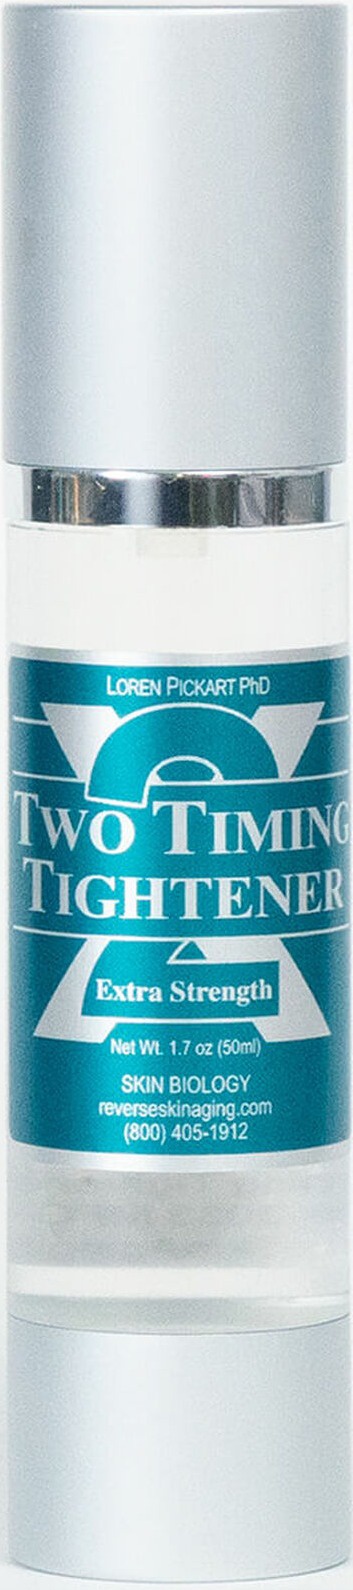 Skin Biology Two Timing Tightener - 2x Extra Strength